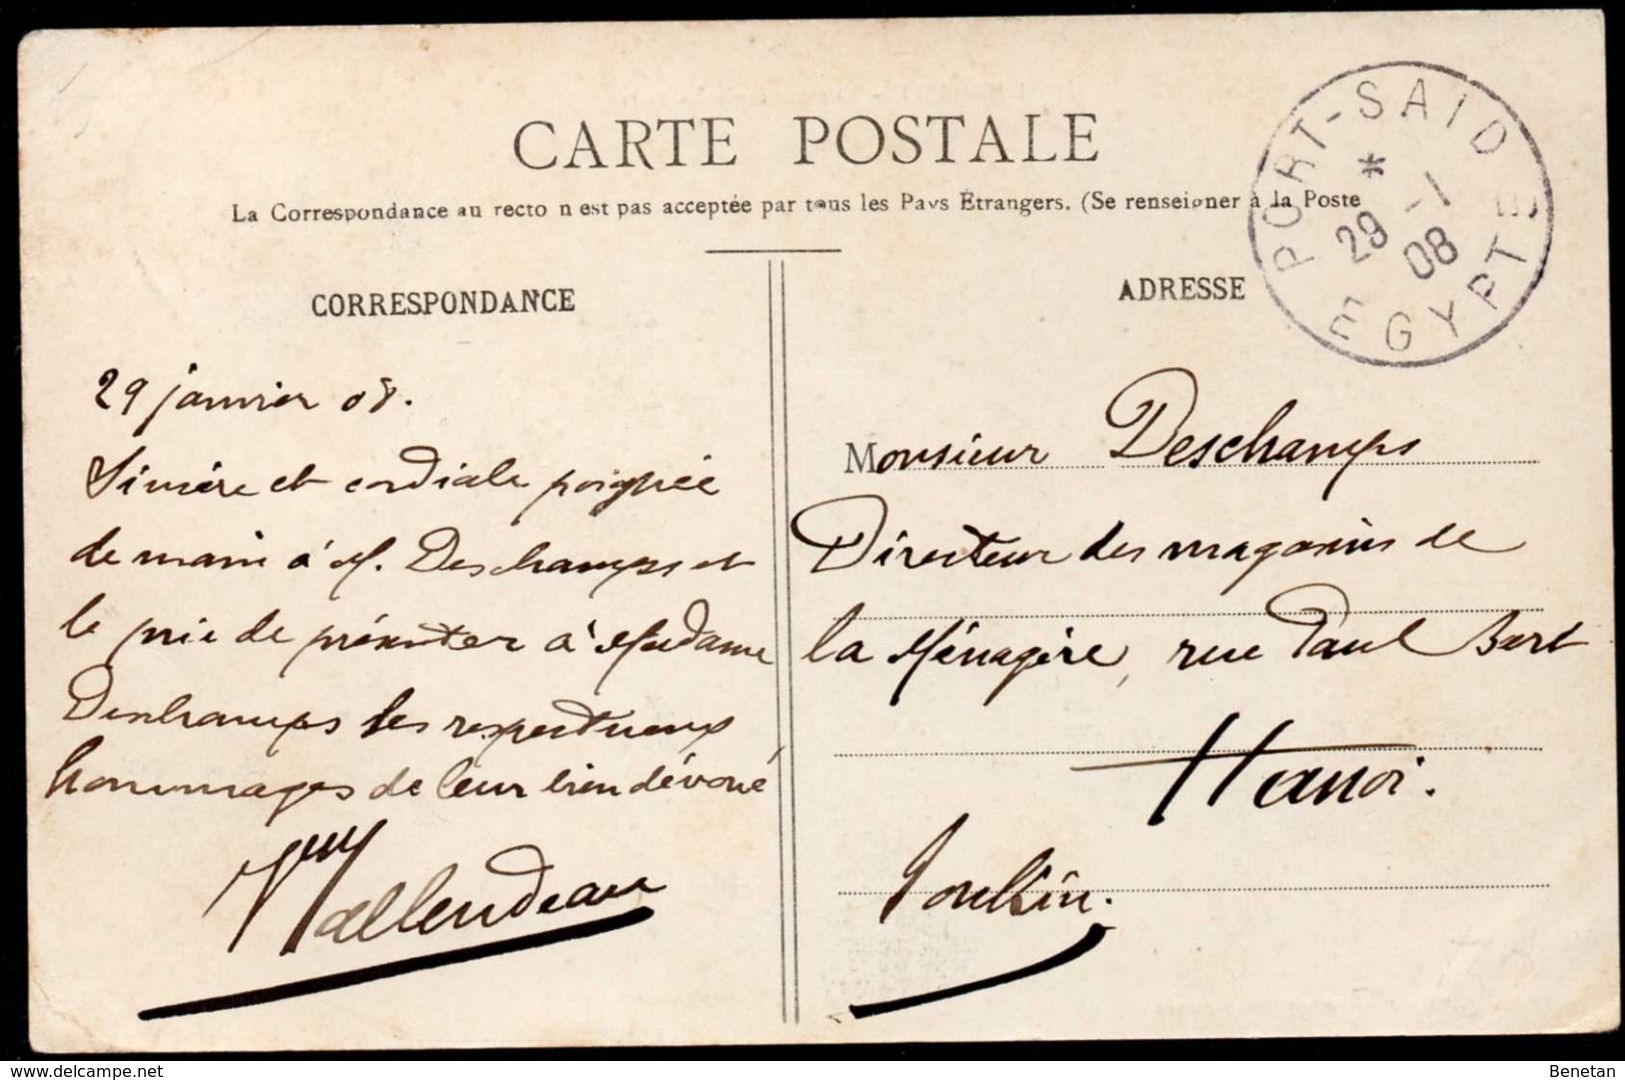 French Port Said To Tonkin, Hanoi Used Postcard 1908 - Covers & Documents